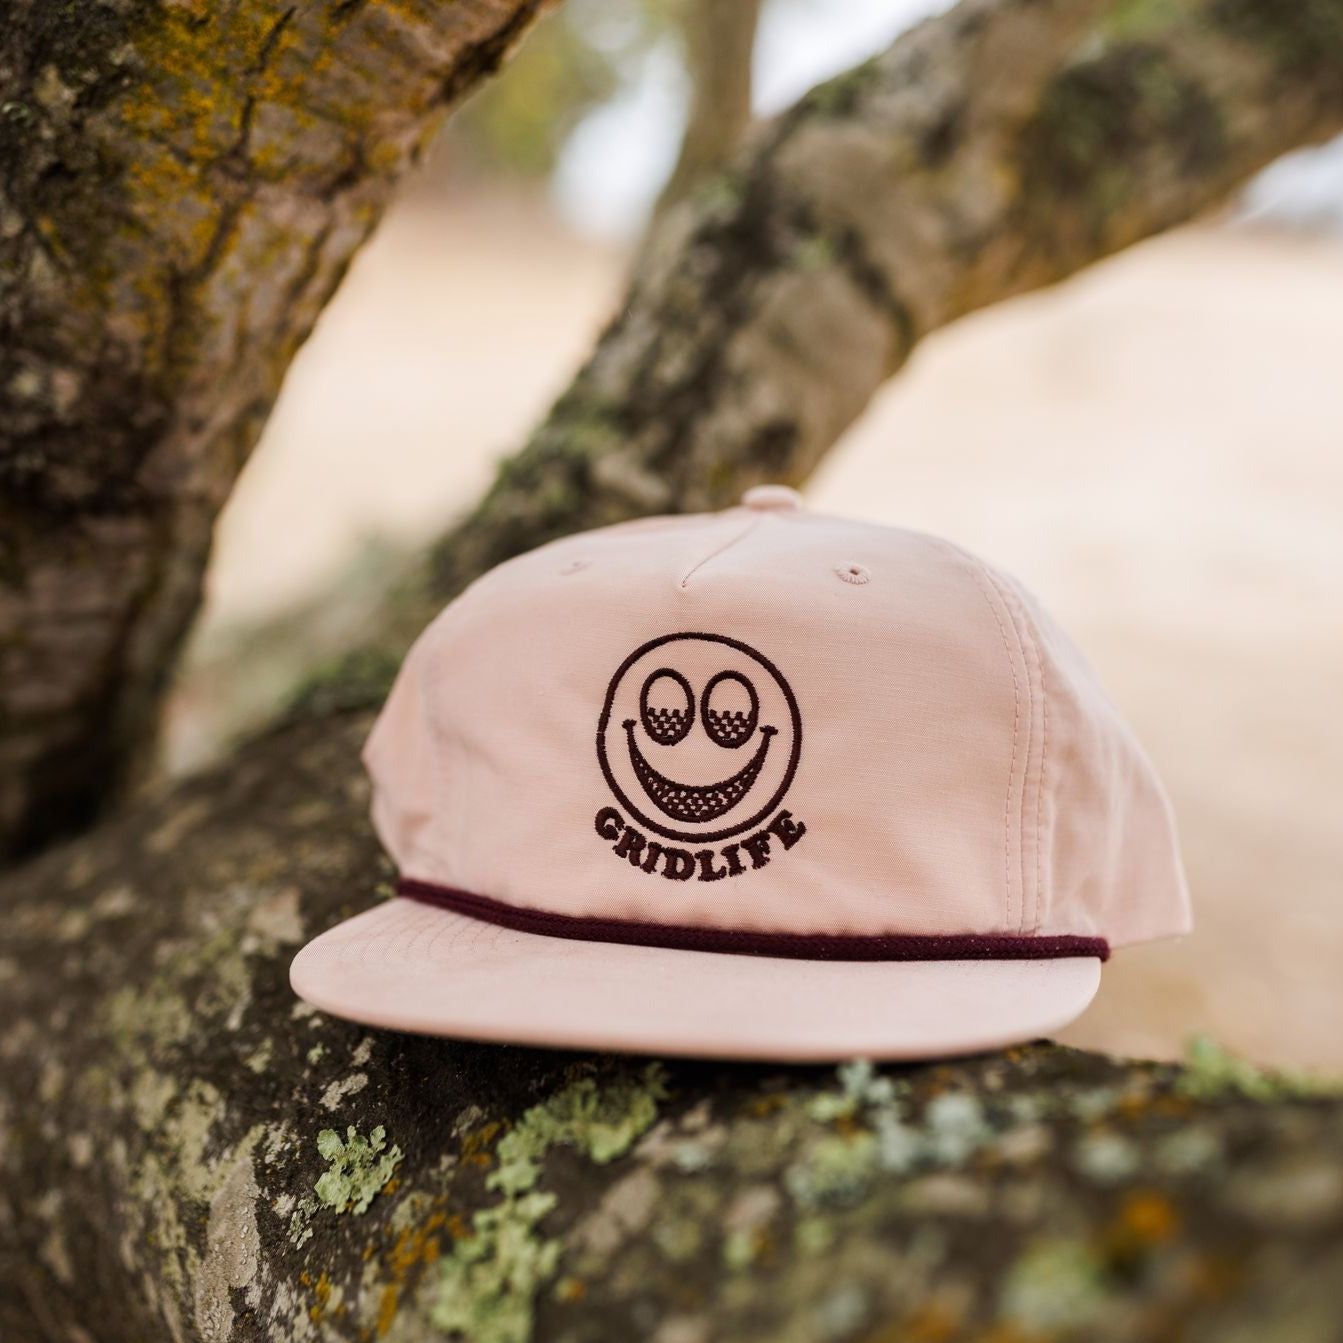 GRIDLIFE pink smiley logo hat on a tree branch